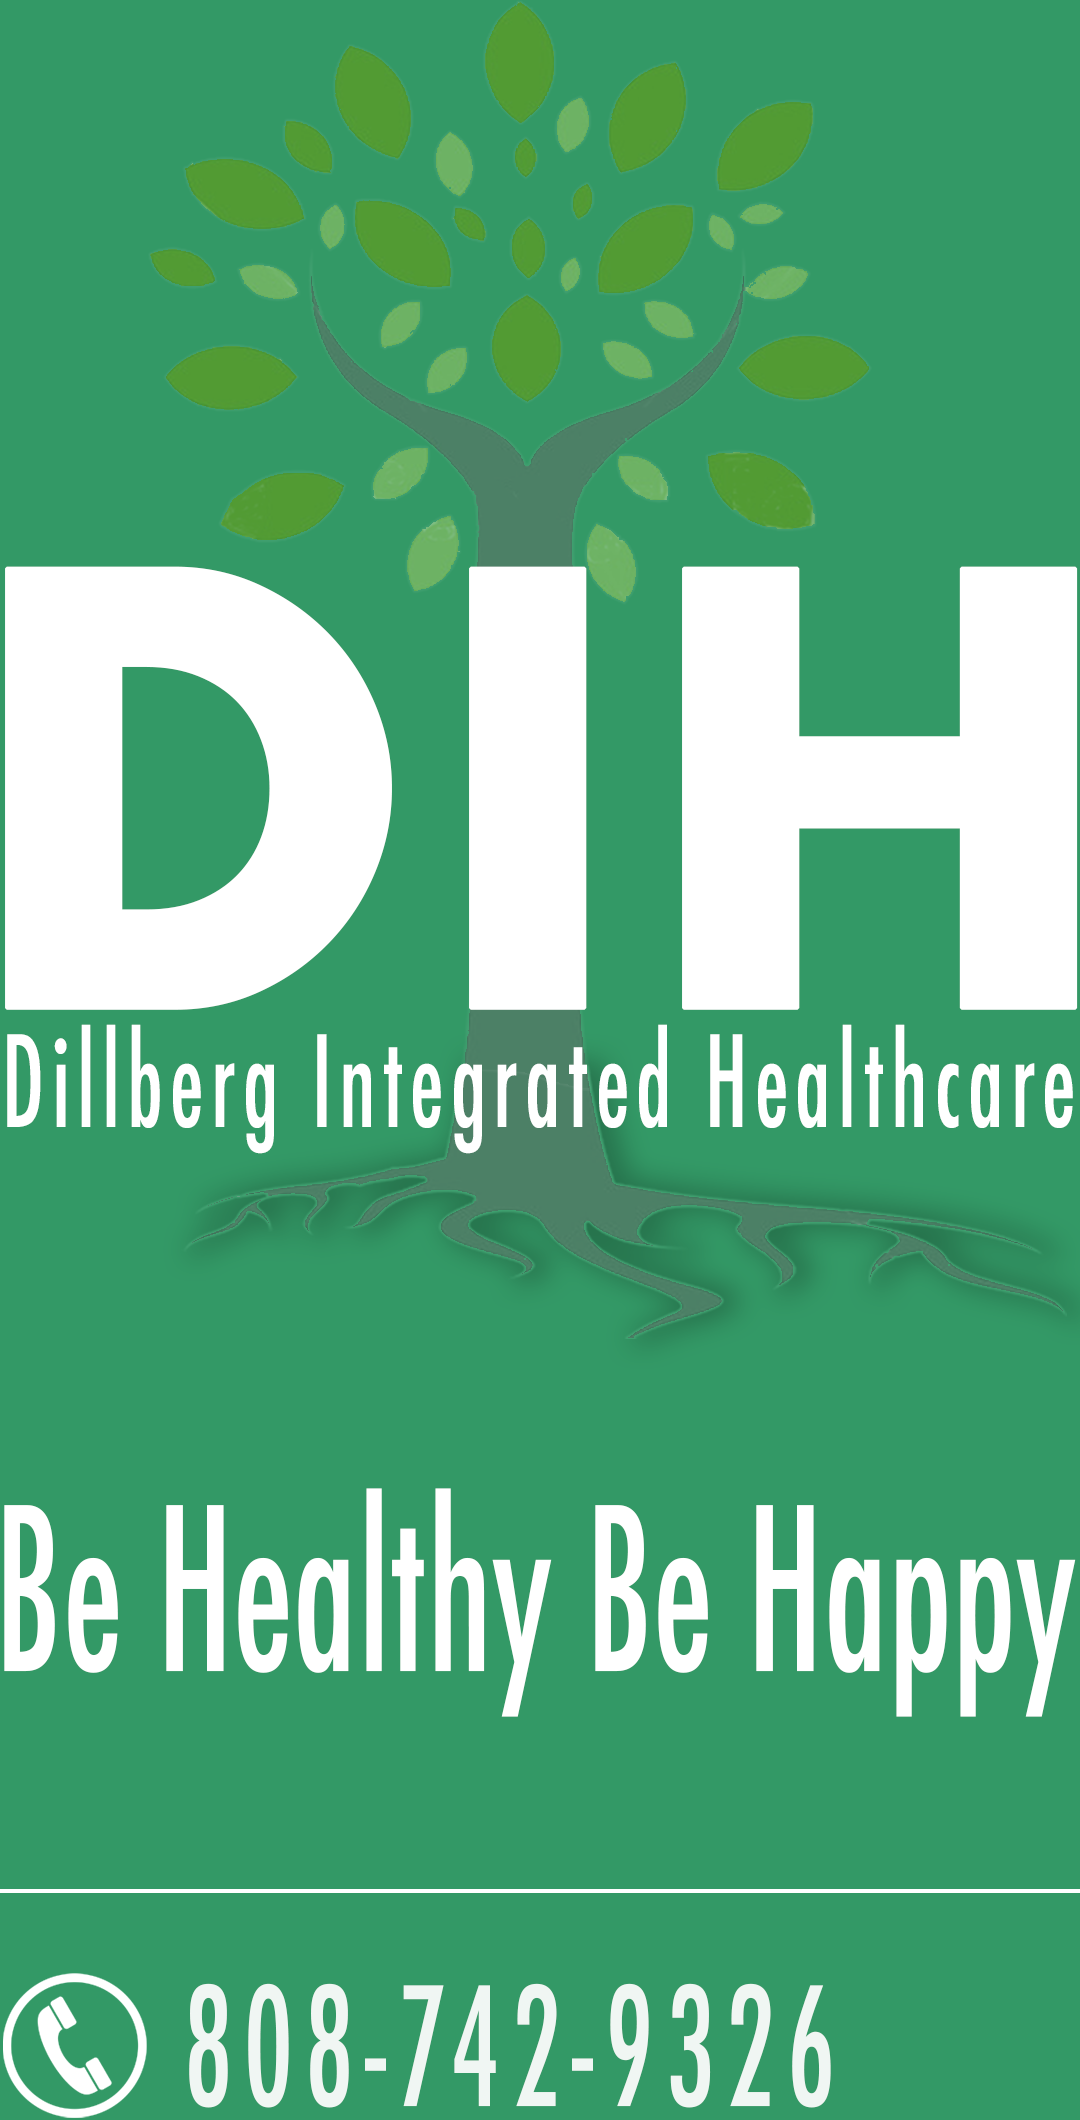 Dillberg Integrated Healthcare